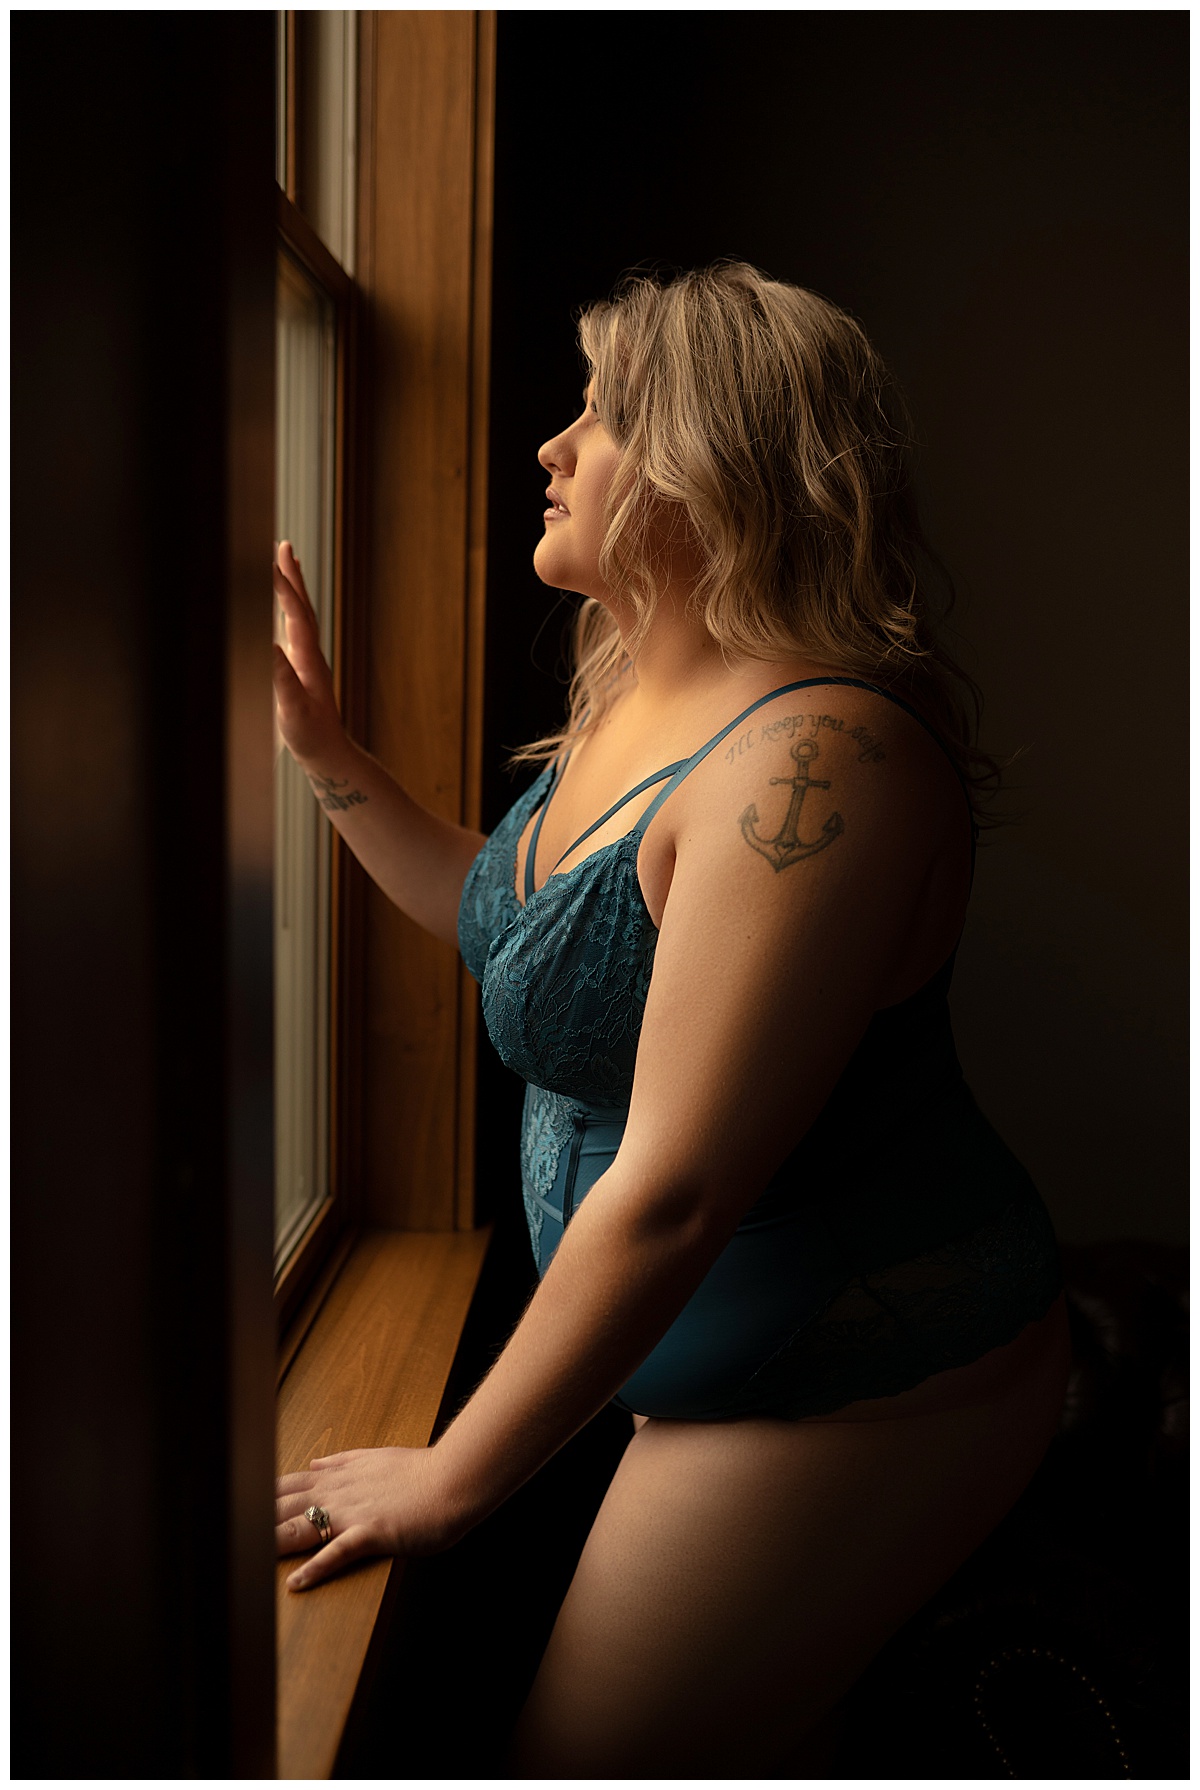 The adult stands in front of a mirror wearing Blue Lace Lingerie 